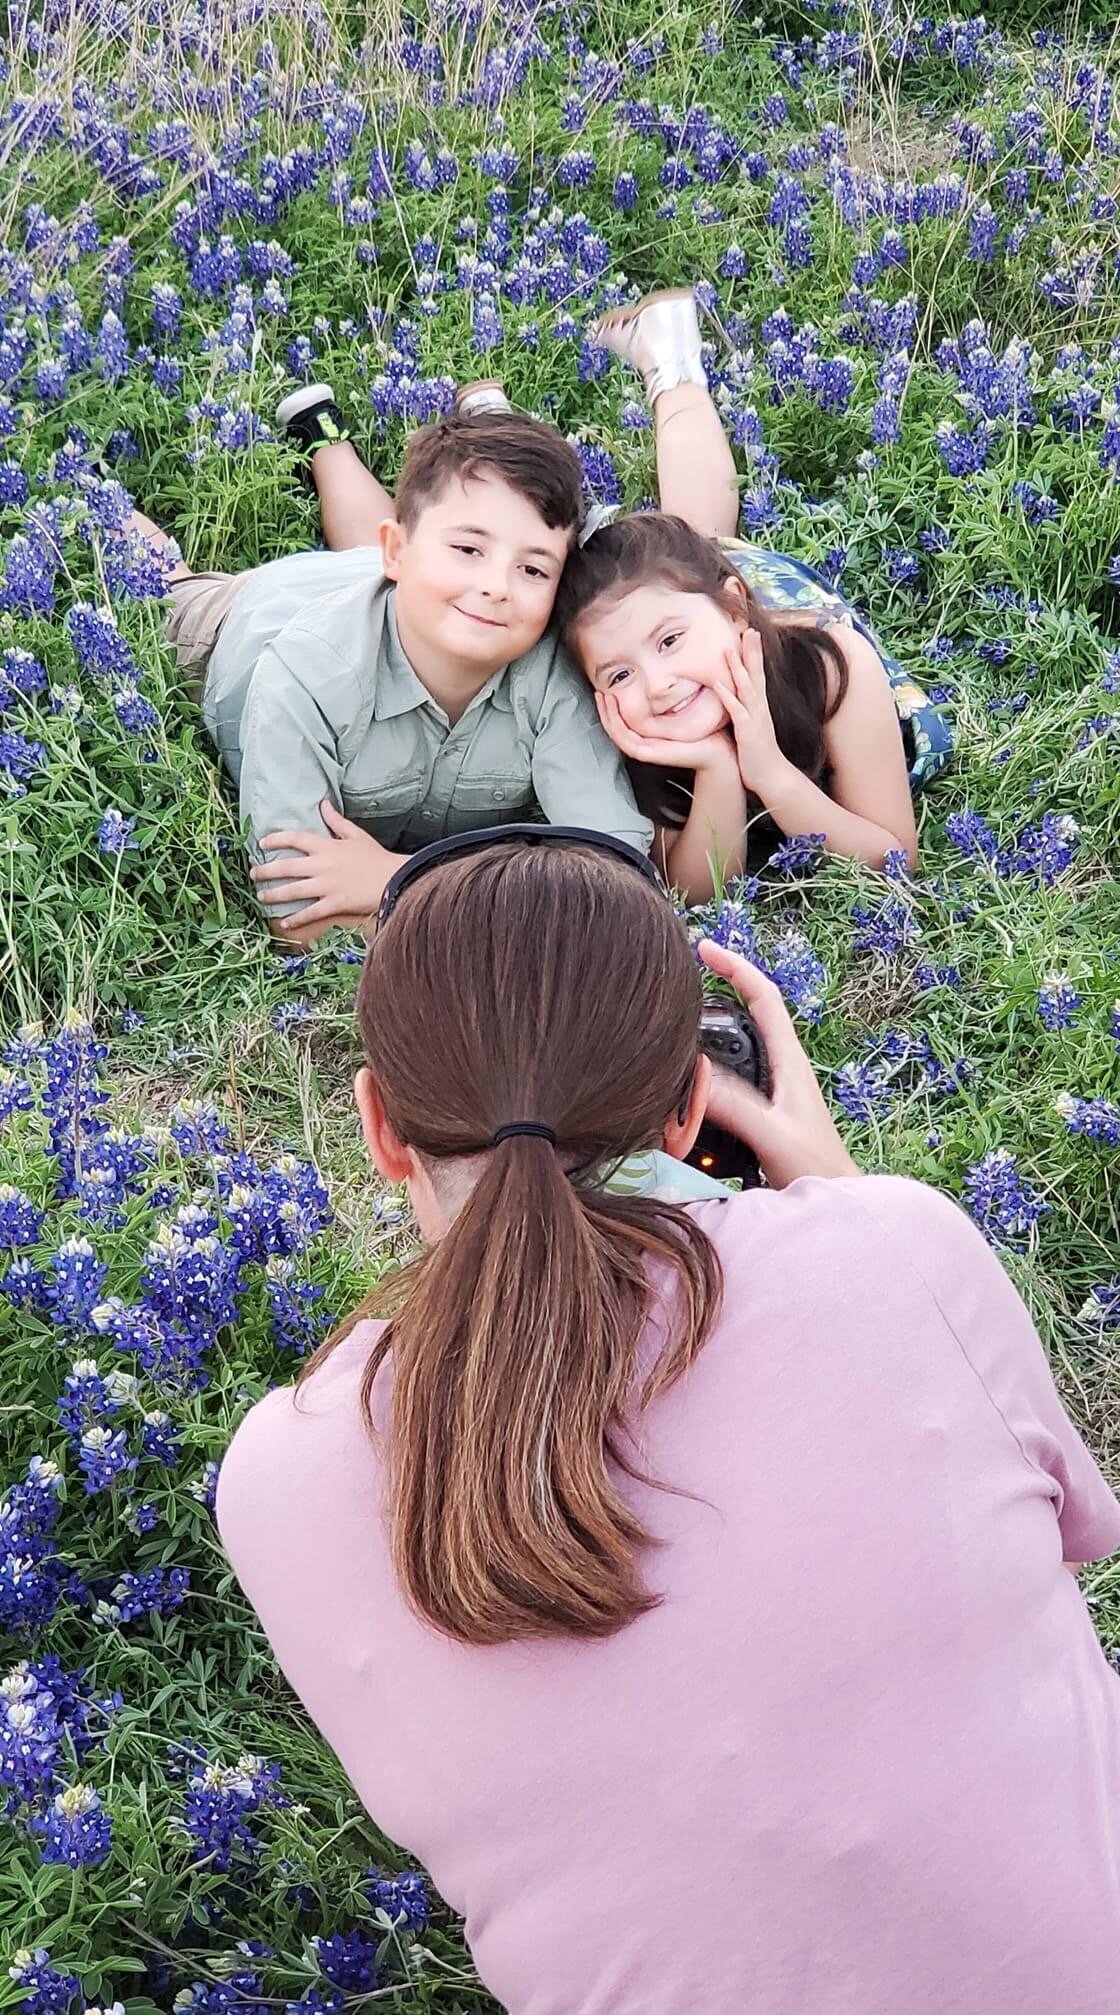 Chunky Monkey Photography in the Bluebonnets